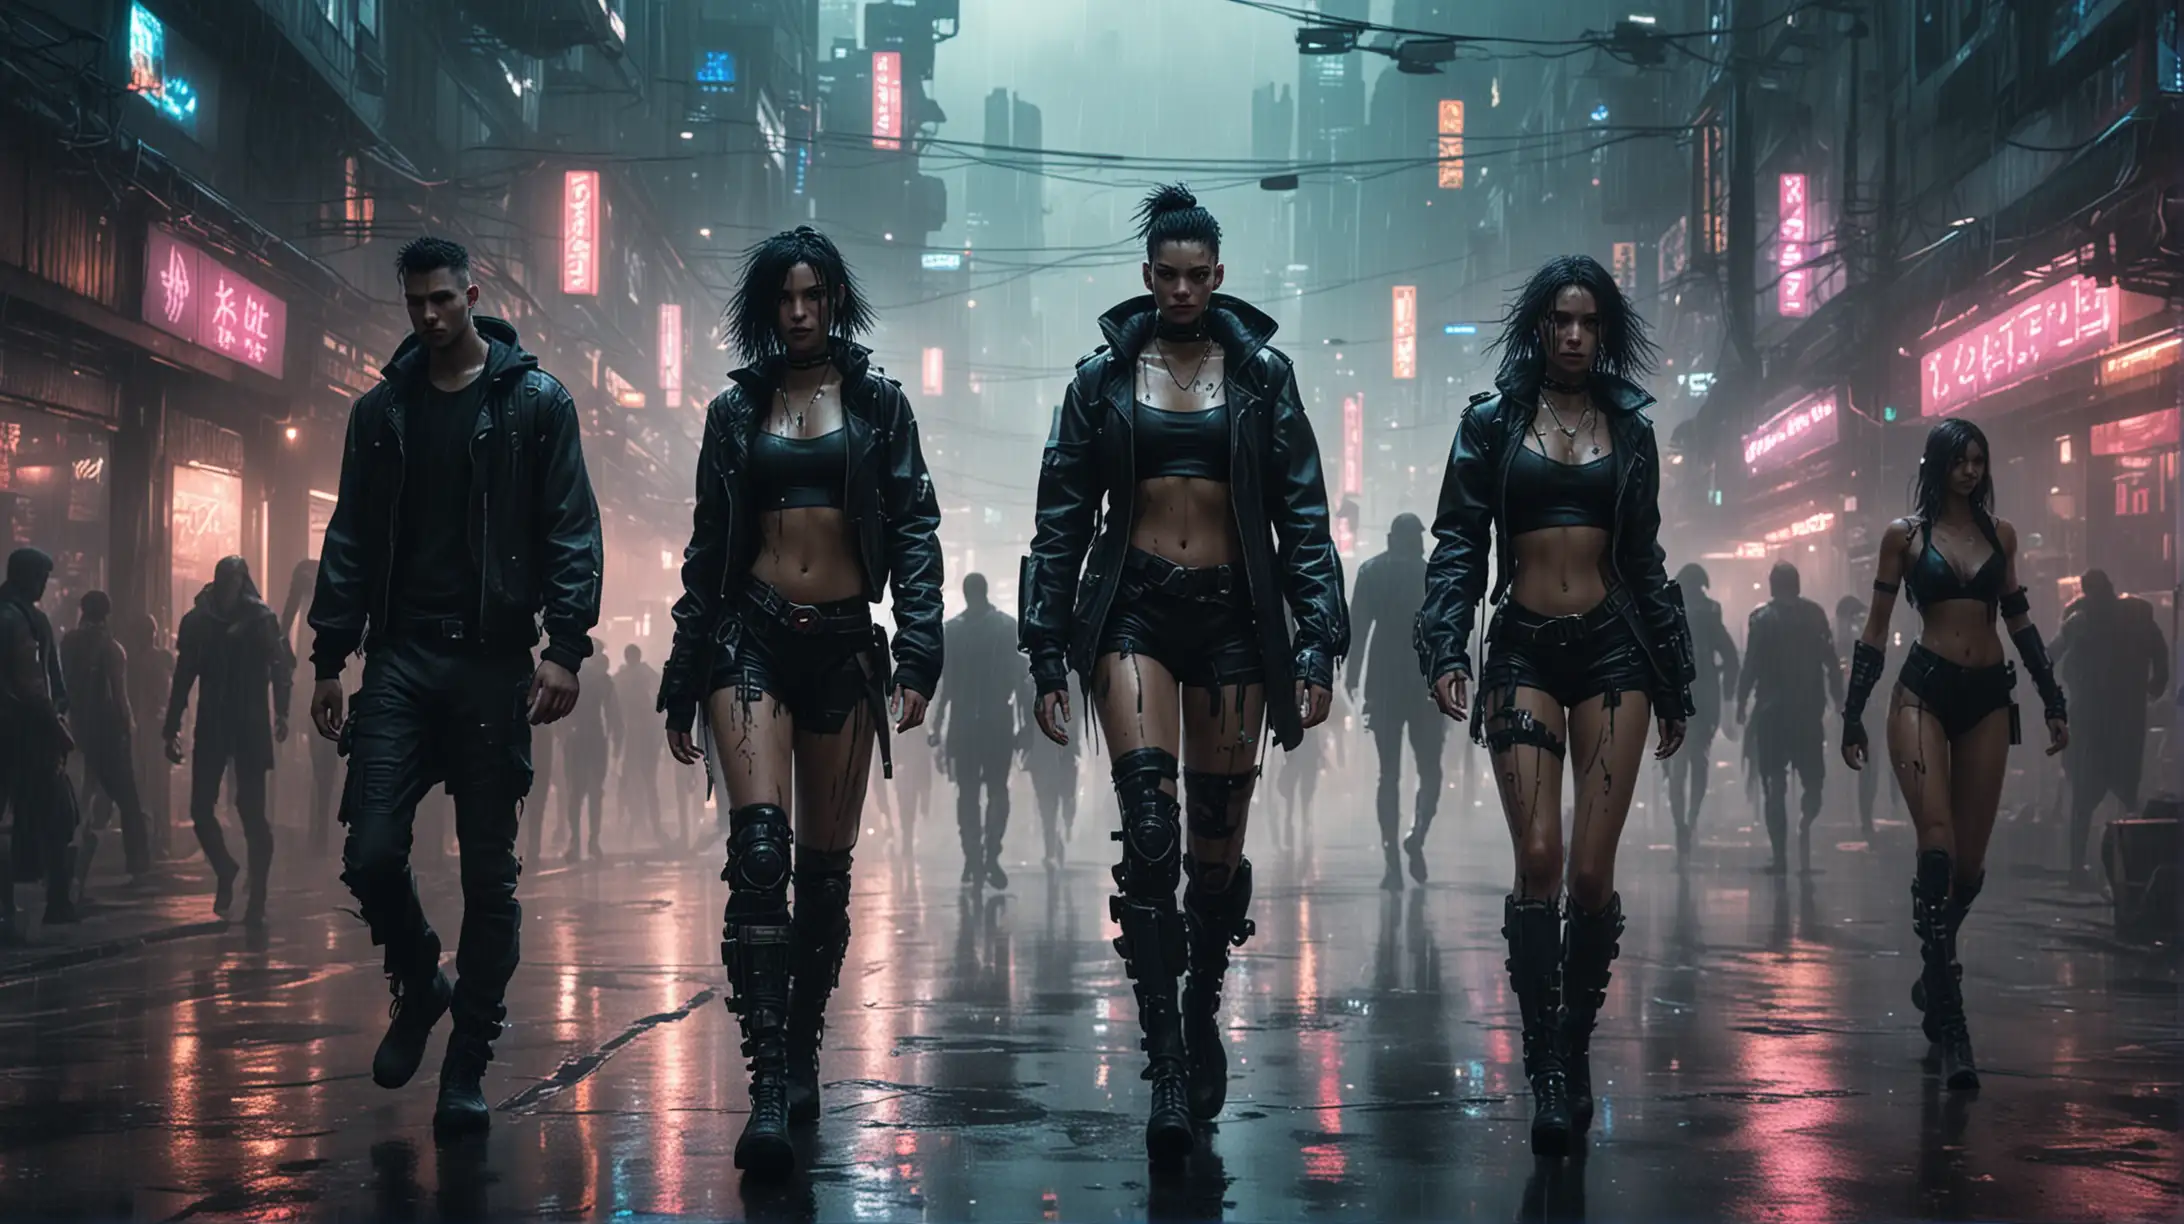 Youthful Cyberpunk Gang Running Through RainDrenched City Streets